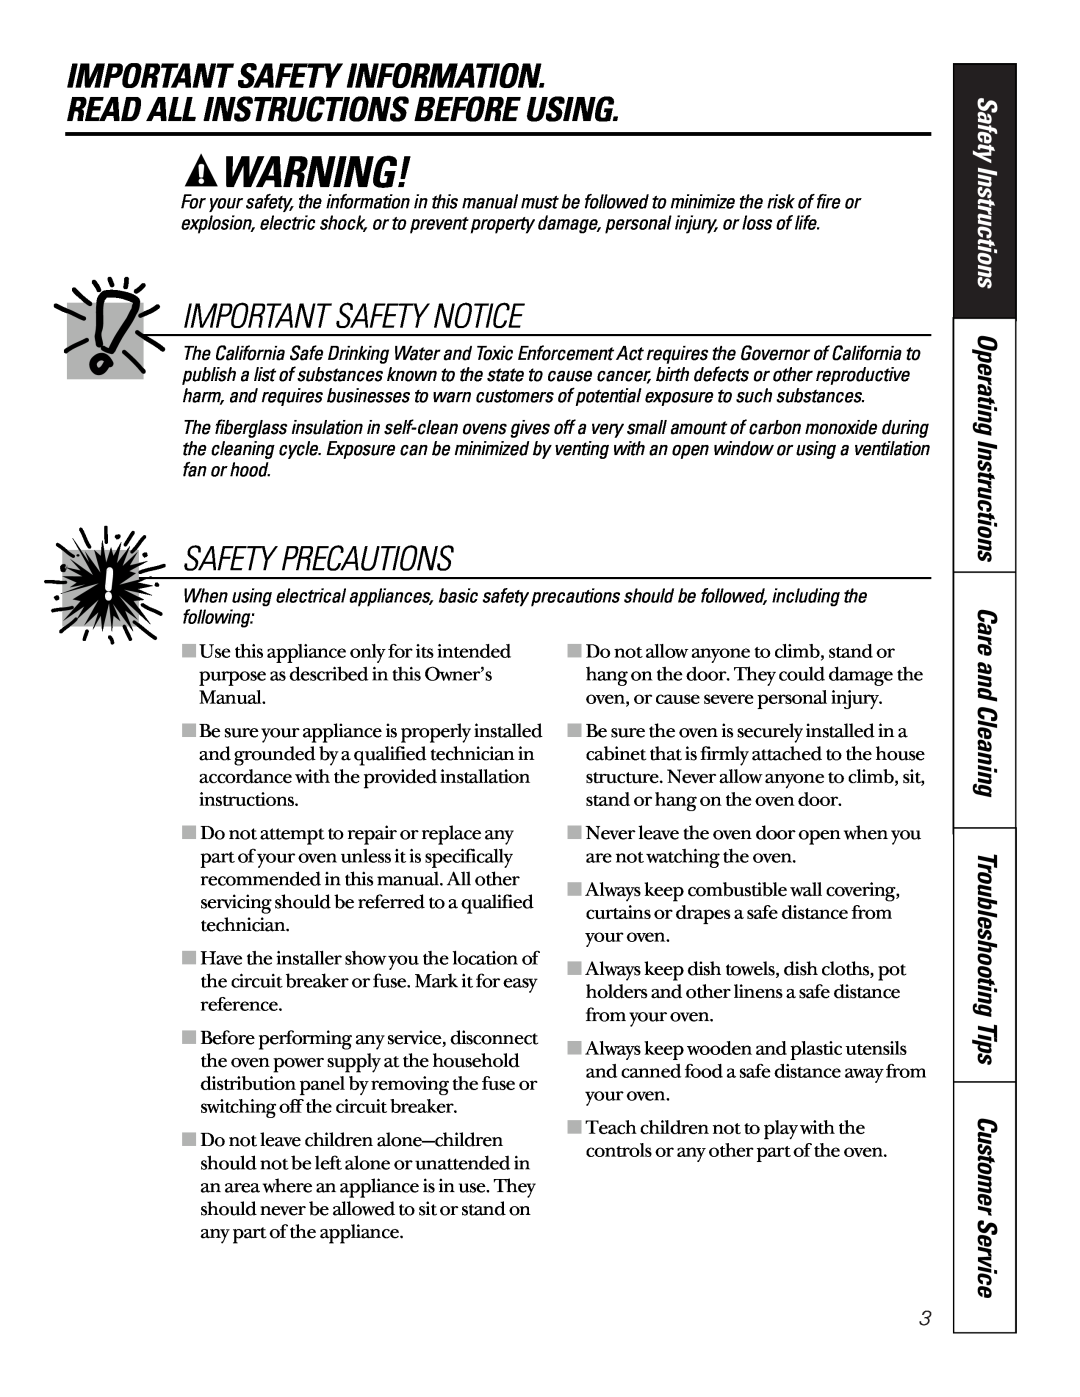 GE jk950 Important Safety Information, Read All Instructions Before Using, Important Safety Notice, Safety Precautions 